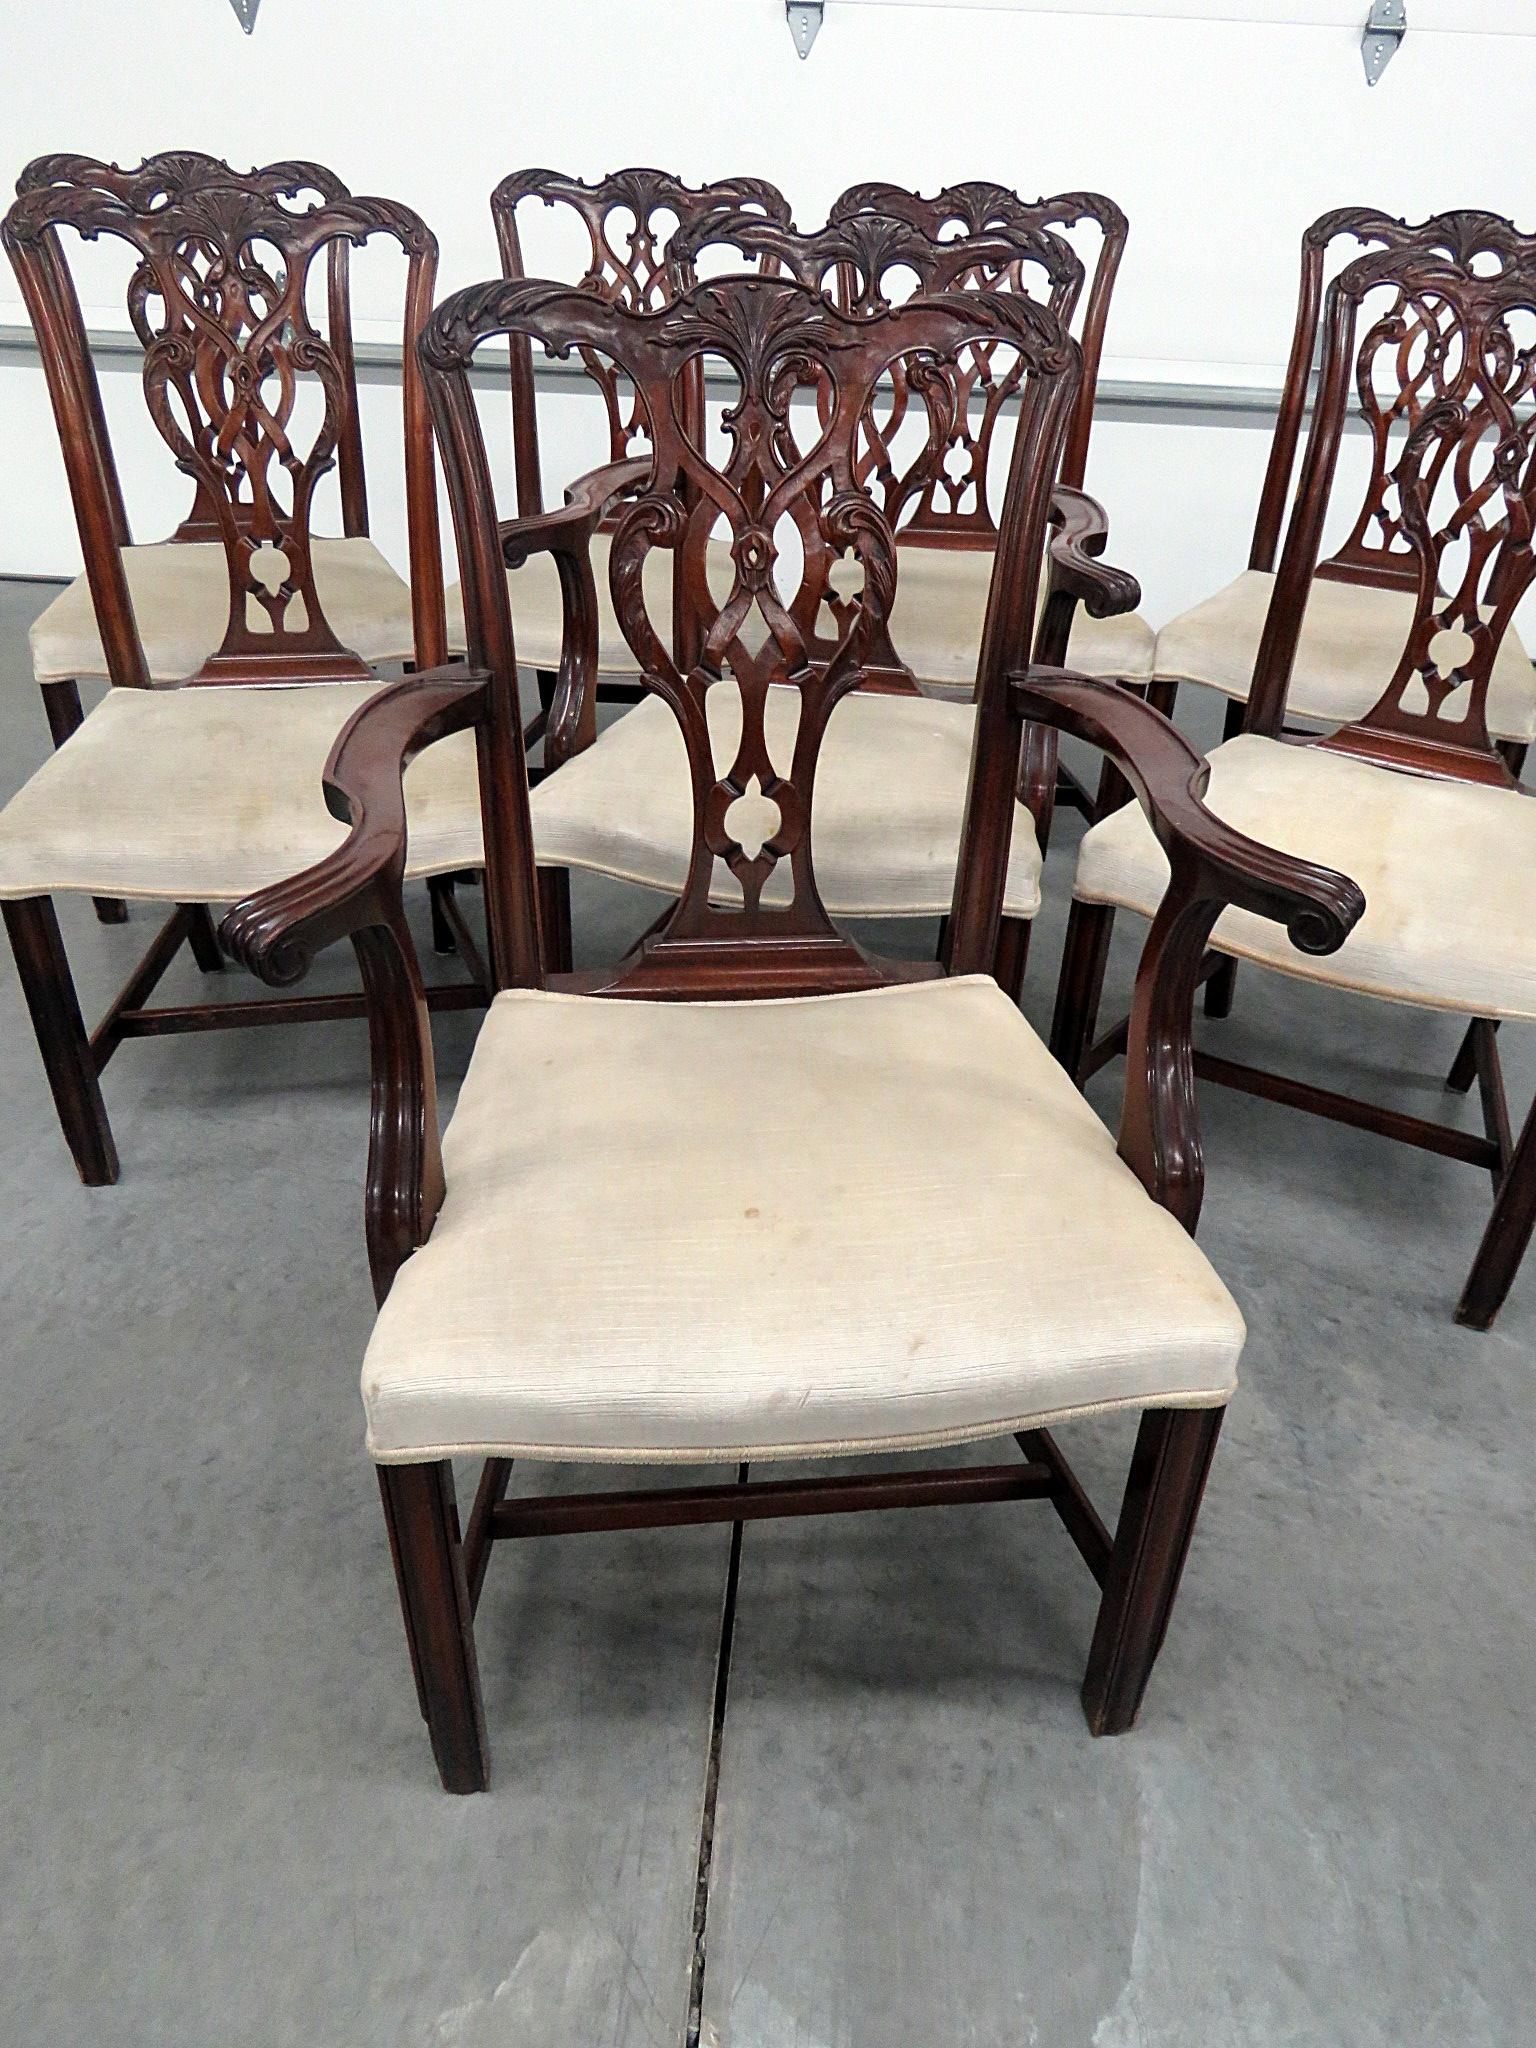 20th Century Set of 8 Georgian Style Dining Room Chairs